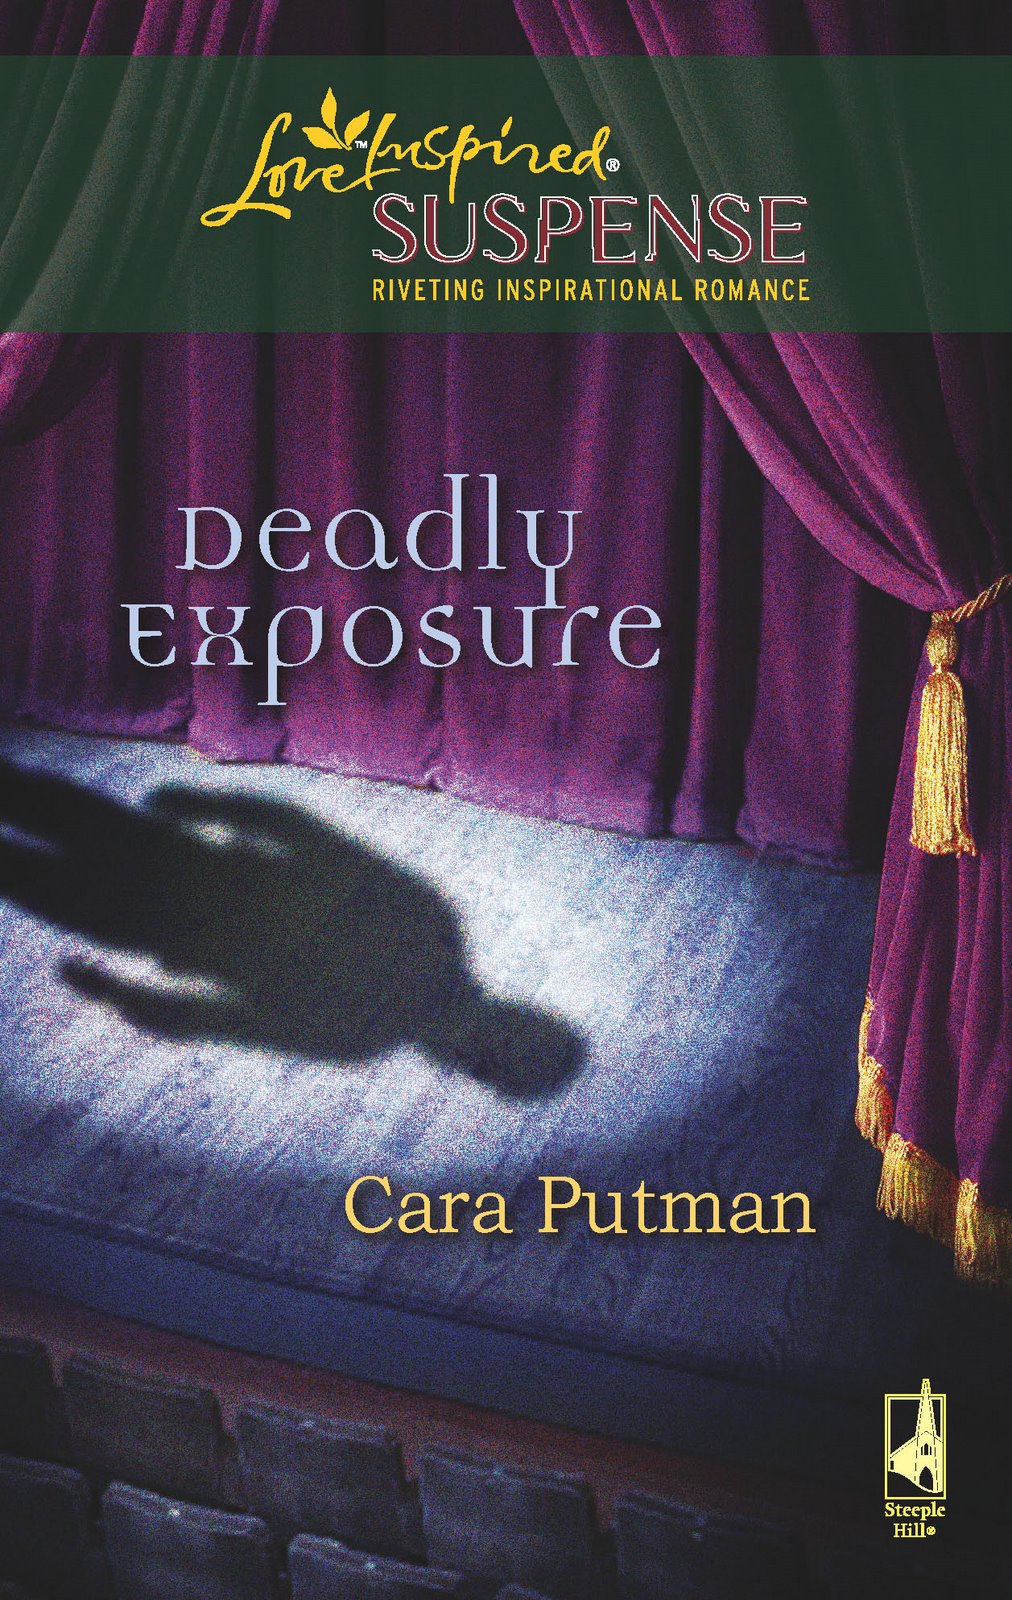 [deadly+exposure+cover+(2).jpg]